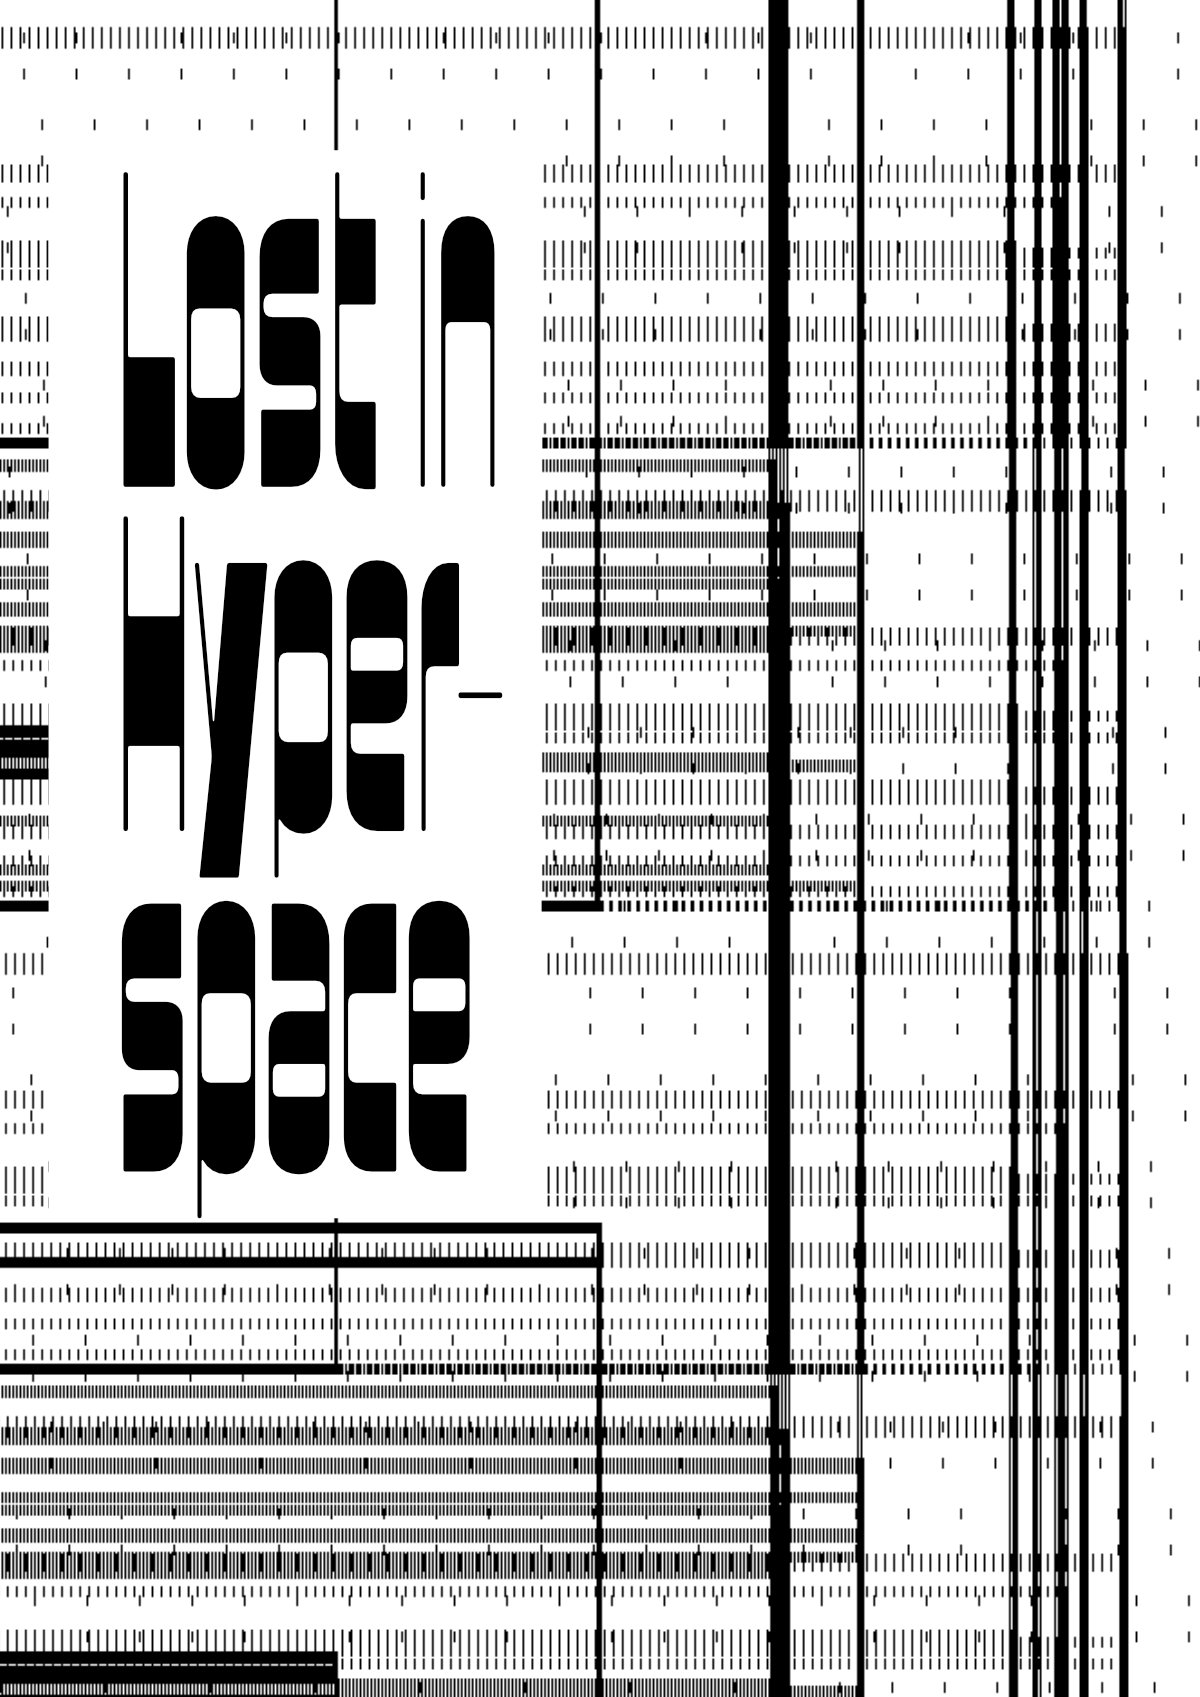 Lost in Hyperspace. Digital screen glitch patterns. Poster by Michael Leonhartsberger